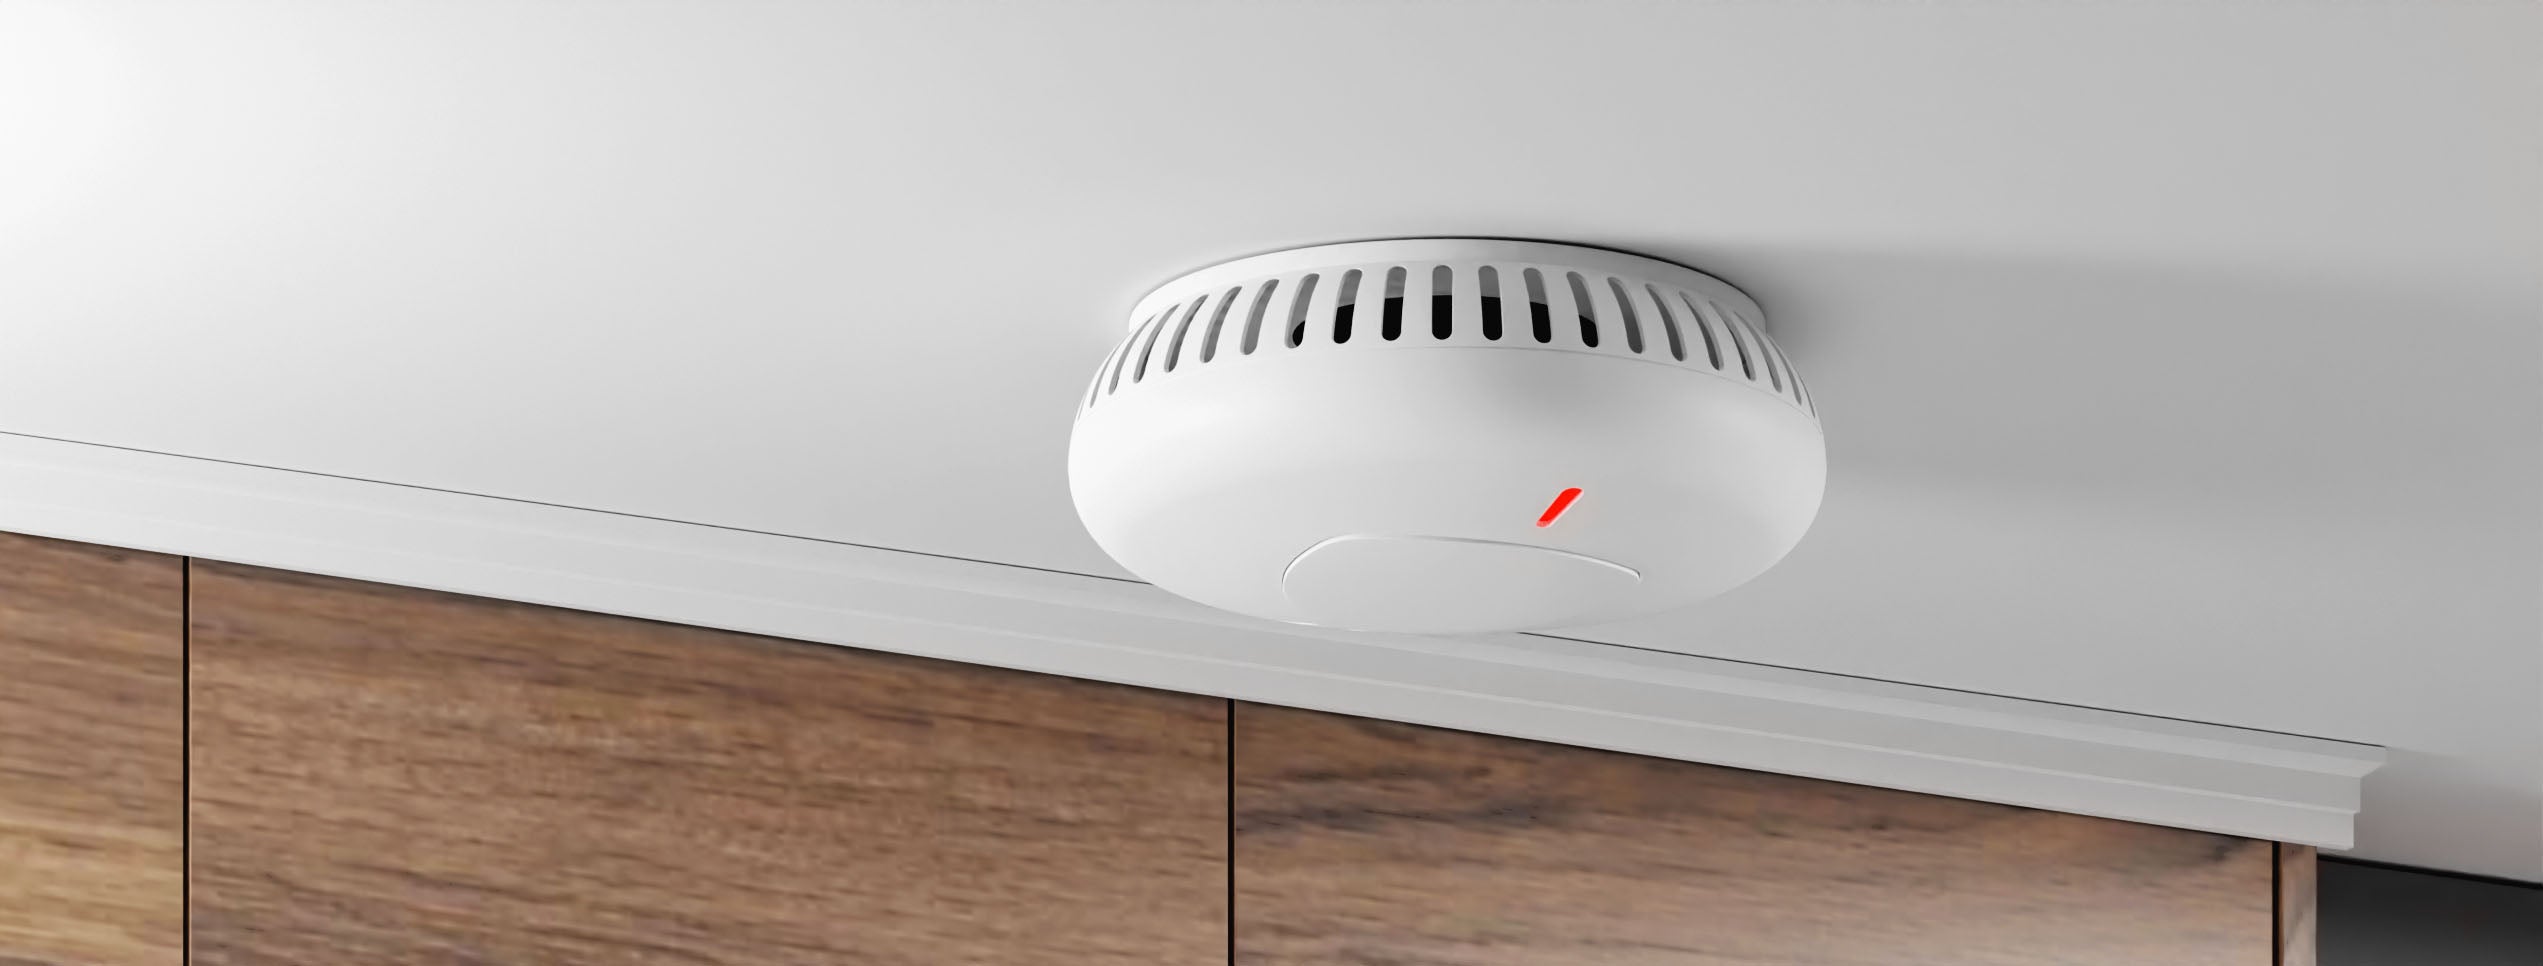 Staniot SK030, Smart Photoelectric Smoke Alarm positioned on ceiling with wooden drawers appearing near the back